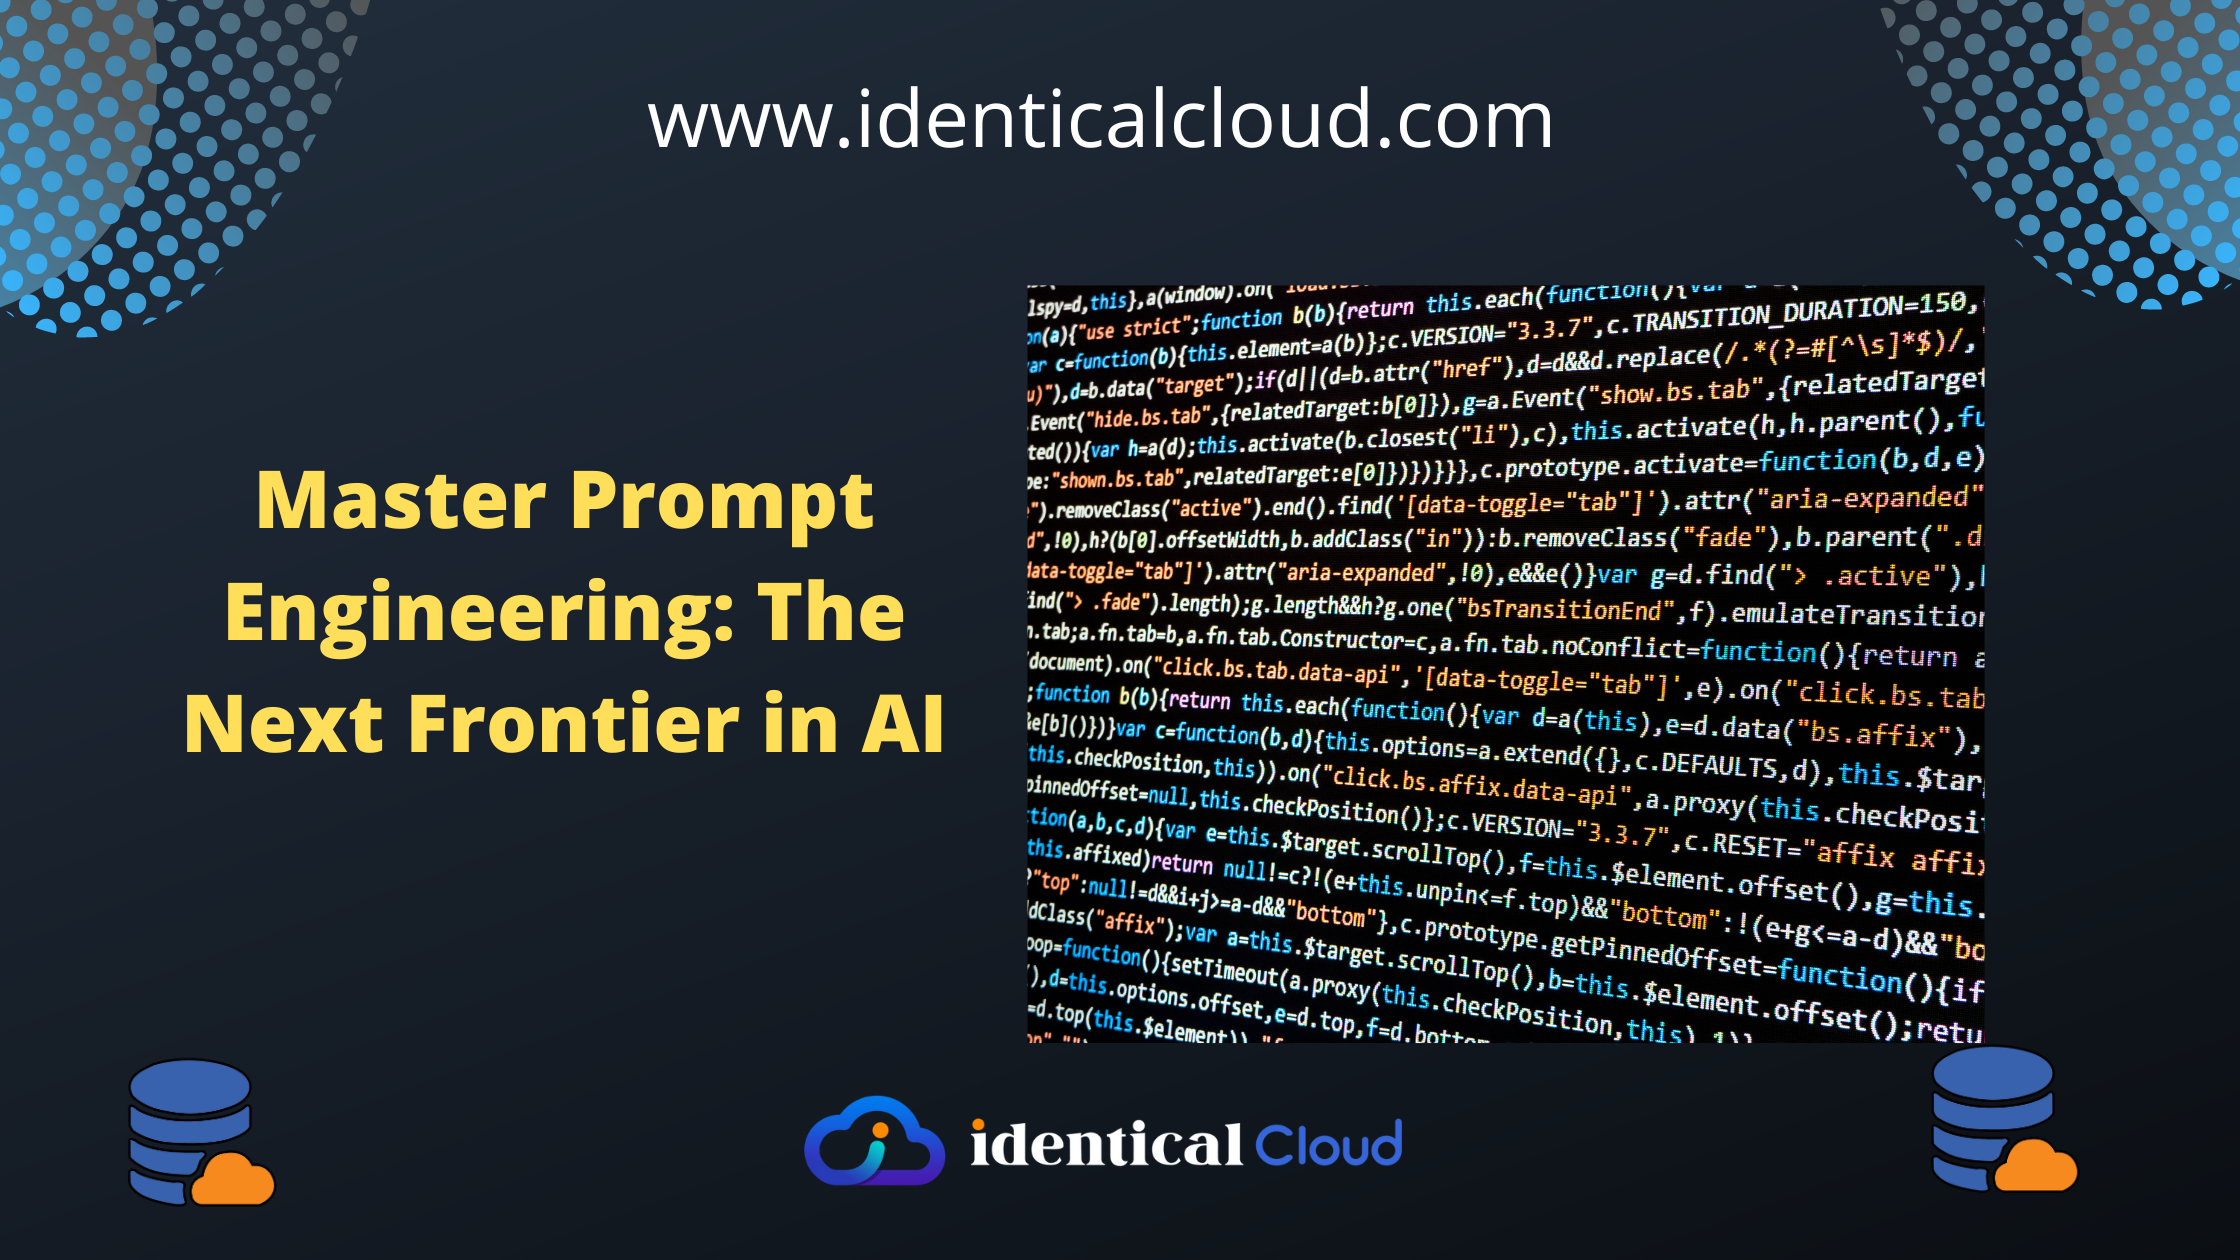 Master Prompt Engineering: The Next Frontier in AI - identicalcloud.com